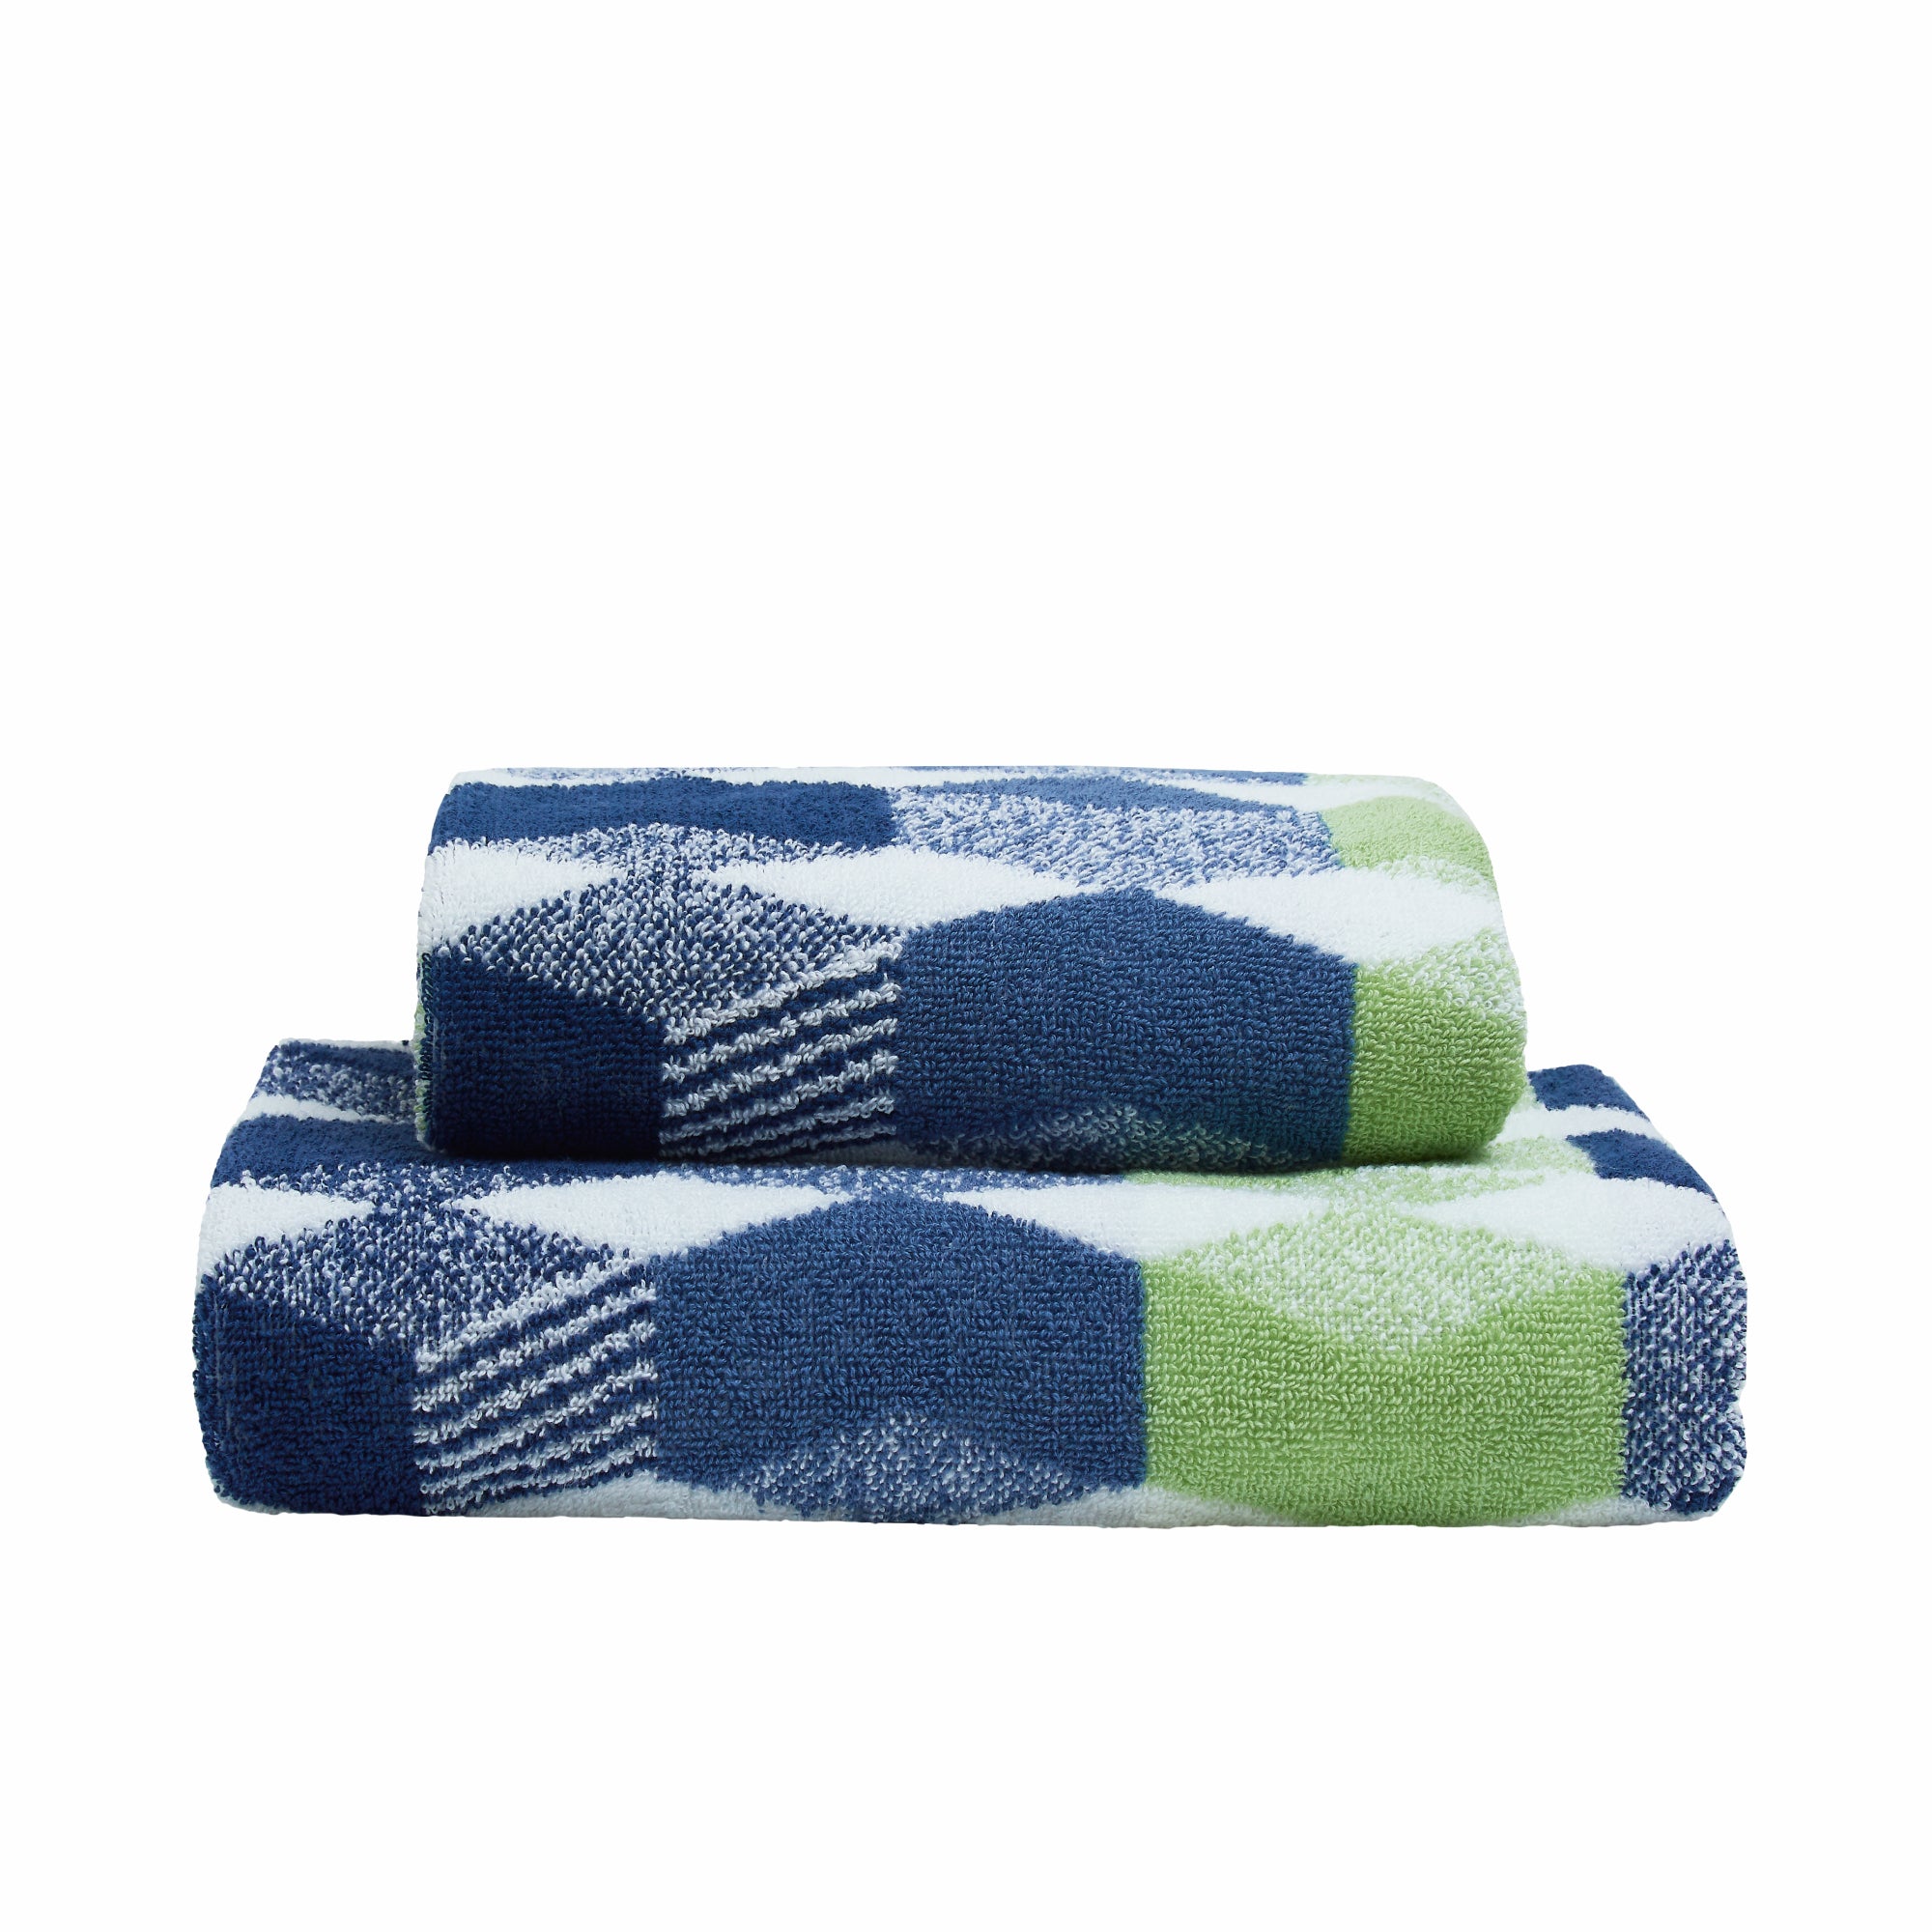 Hexagon Hand and Bath Towels by Fusion Bathroom in Navy